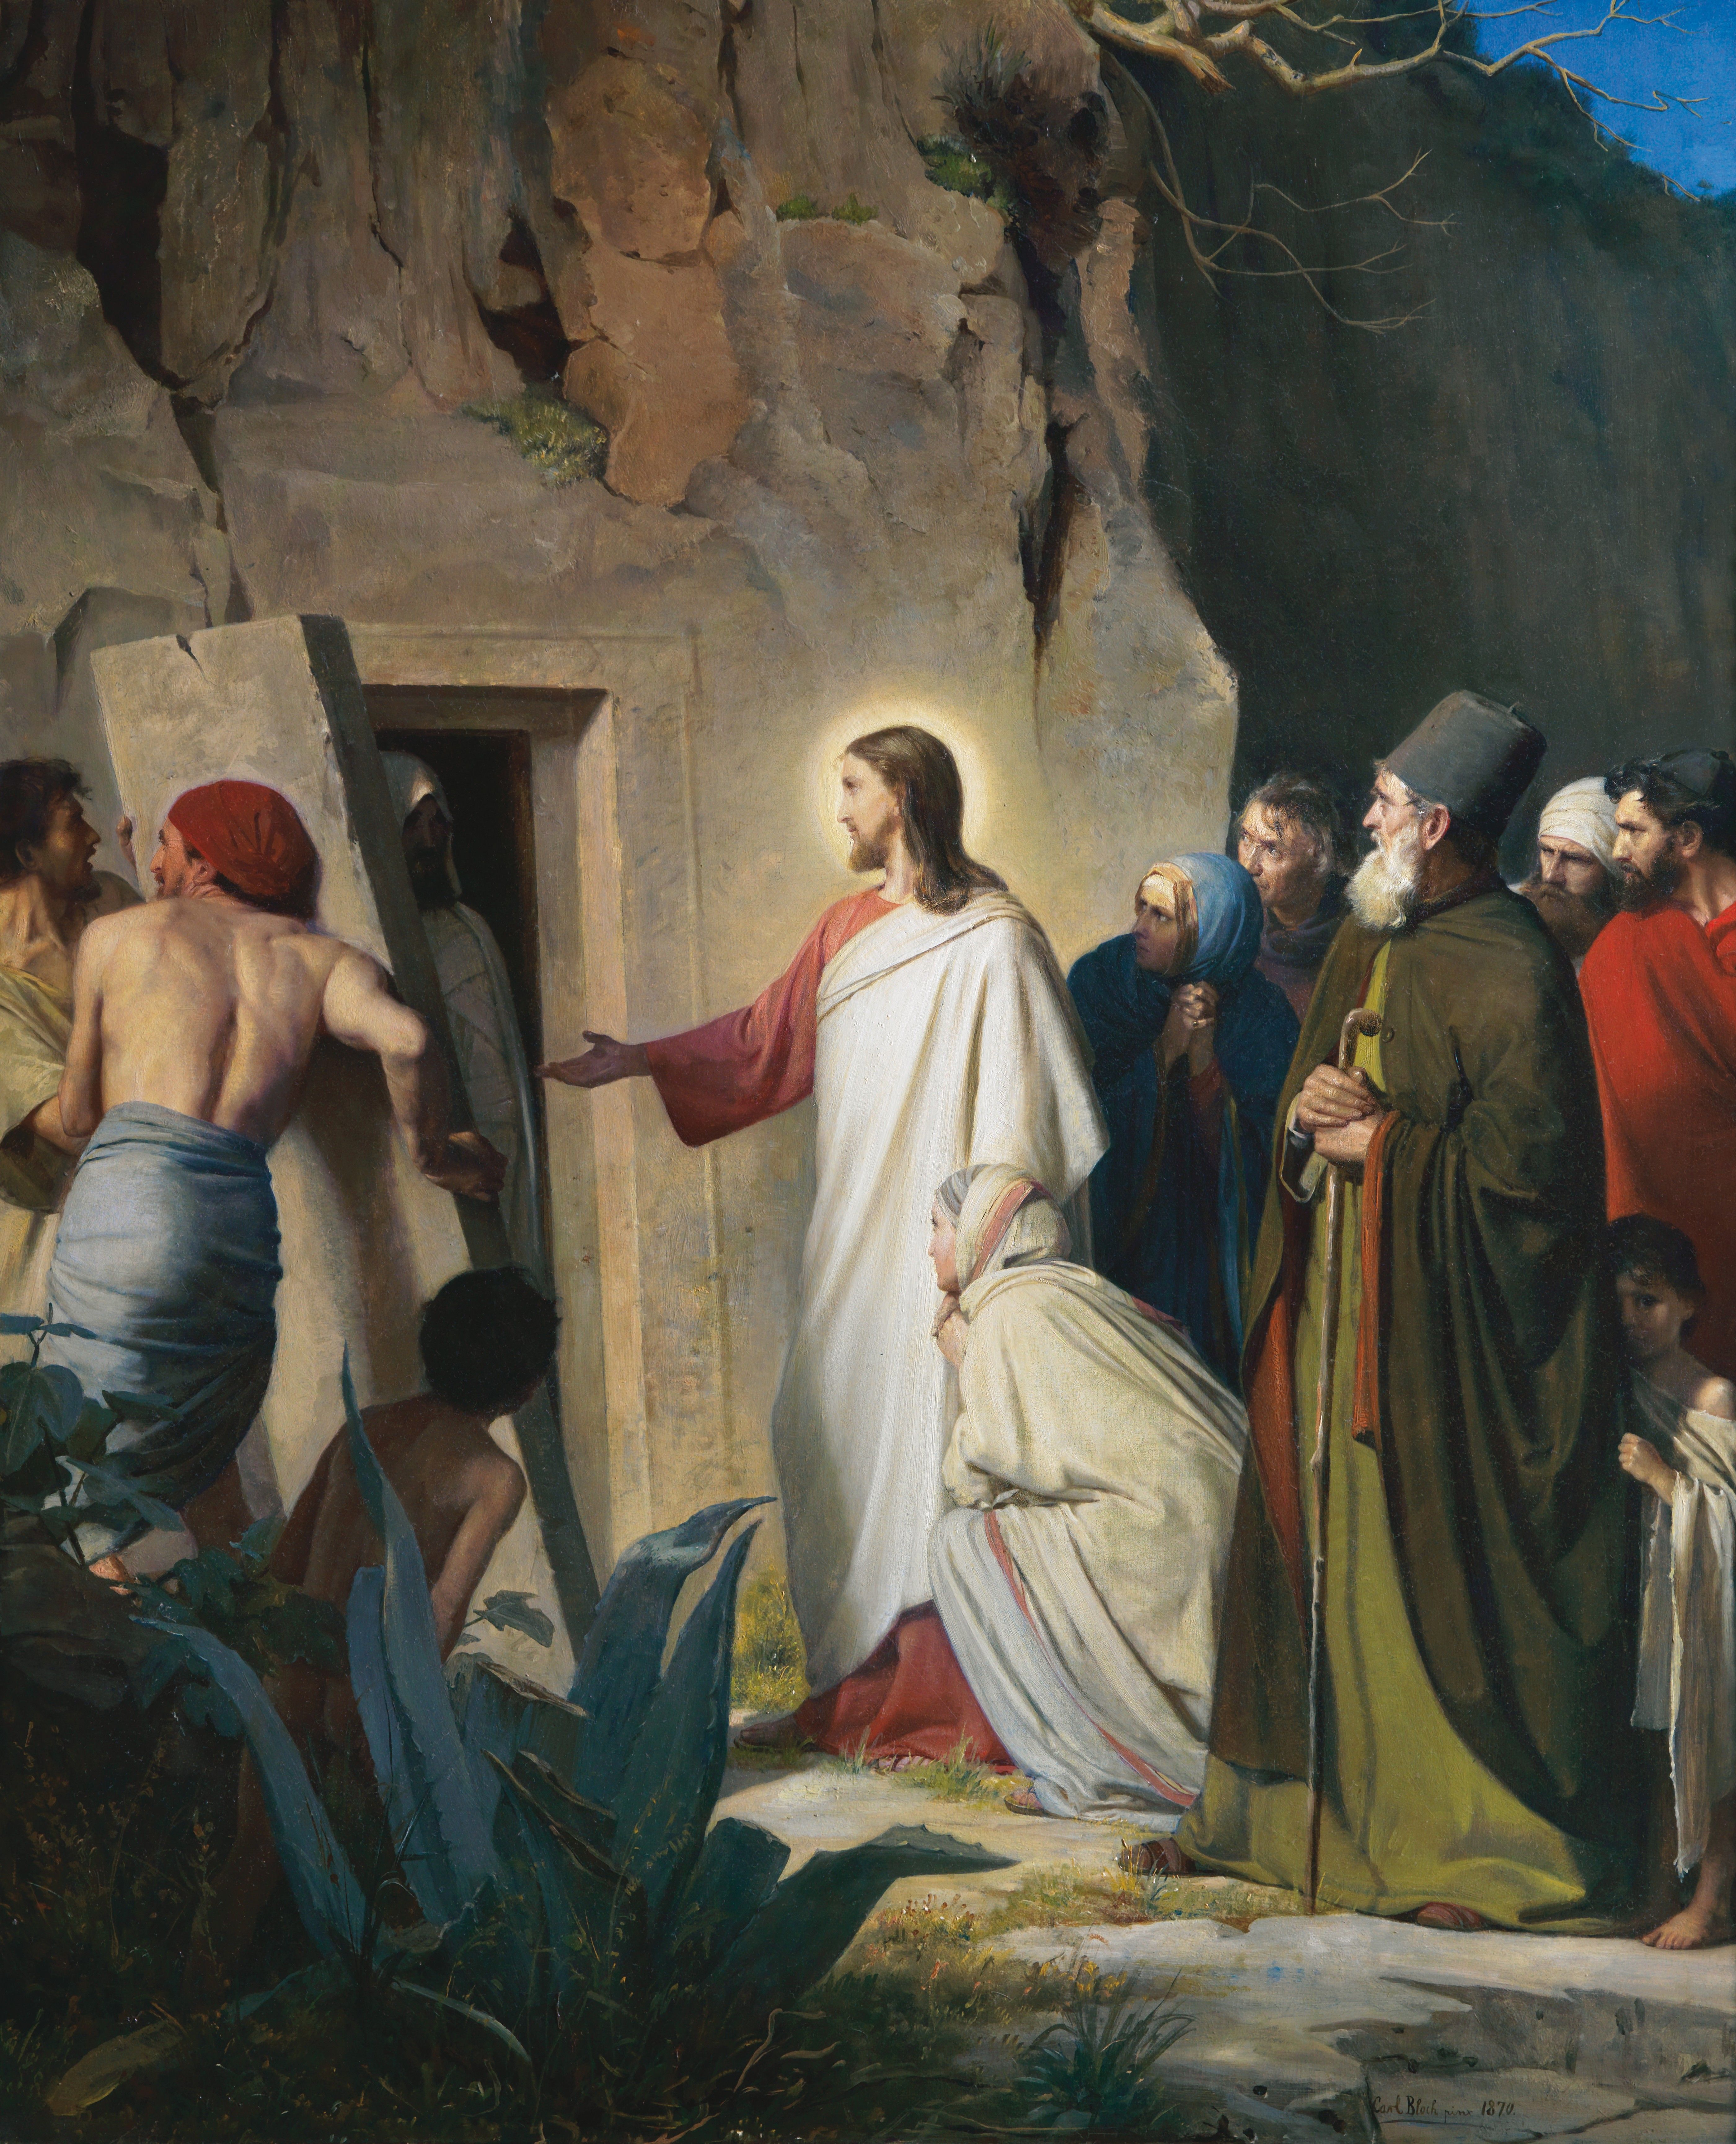 Our Lord Raises Lazarus